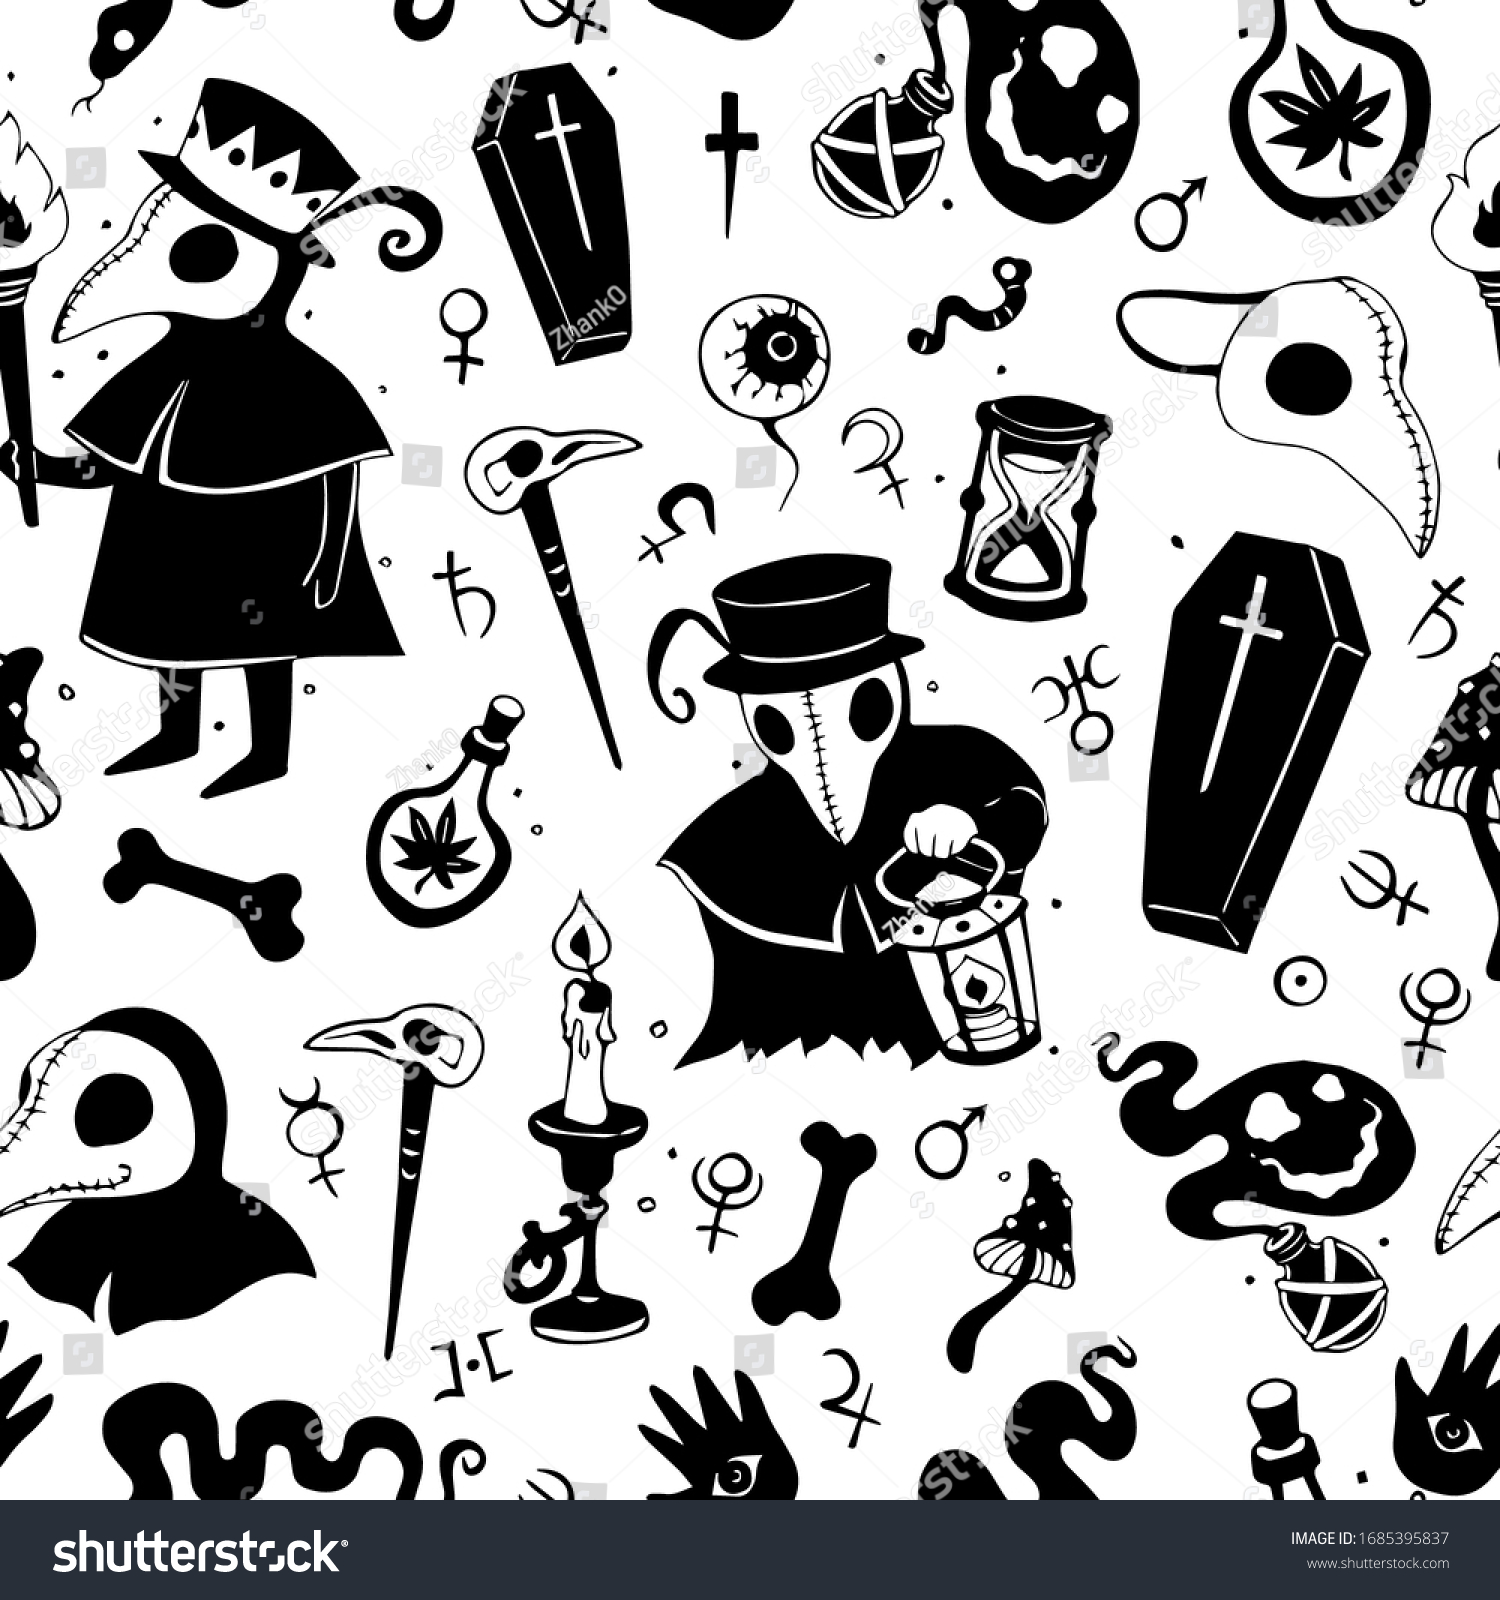 SVG of Vector black and white graphic cartoon pattern with plague doctors isolated on the white background. Seamless pattern can be used for wallpaper, pattern fills, web page background, texture svg